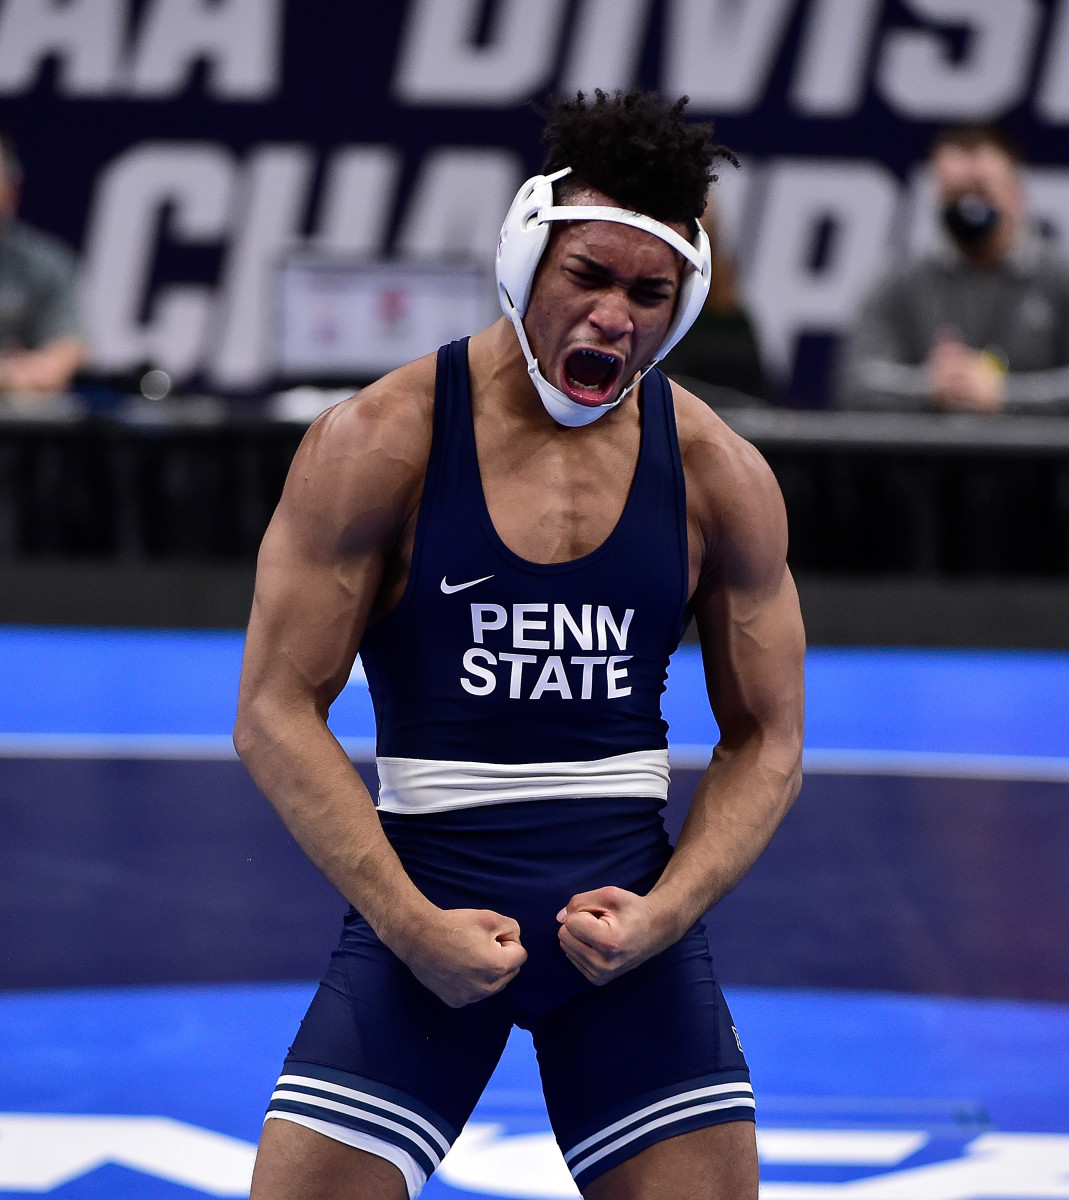 Penn State Wins Four titles at the NCAA Division I Wrestling